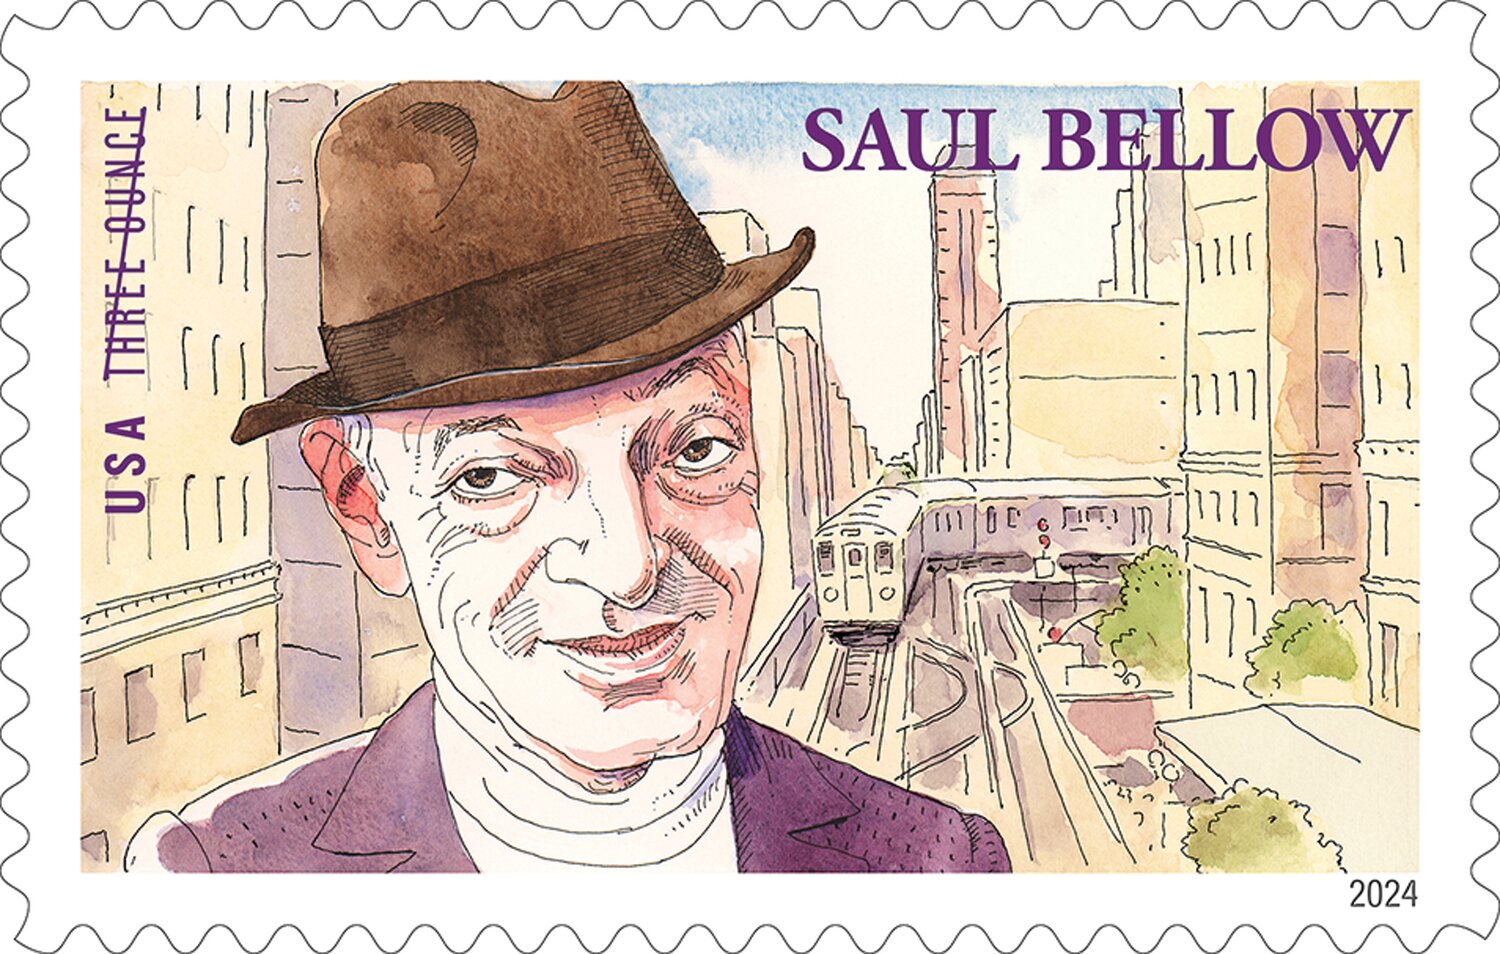 This postage stamp depicting Saul Bellow on a Chicago street was illustrated by Joe Ciardiello of Hunterdon County.